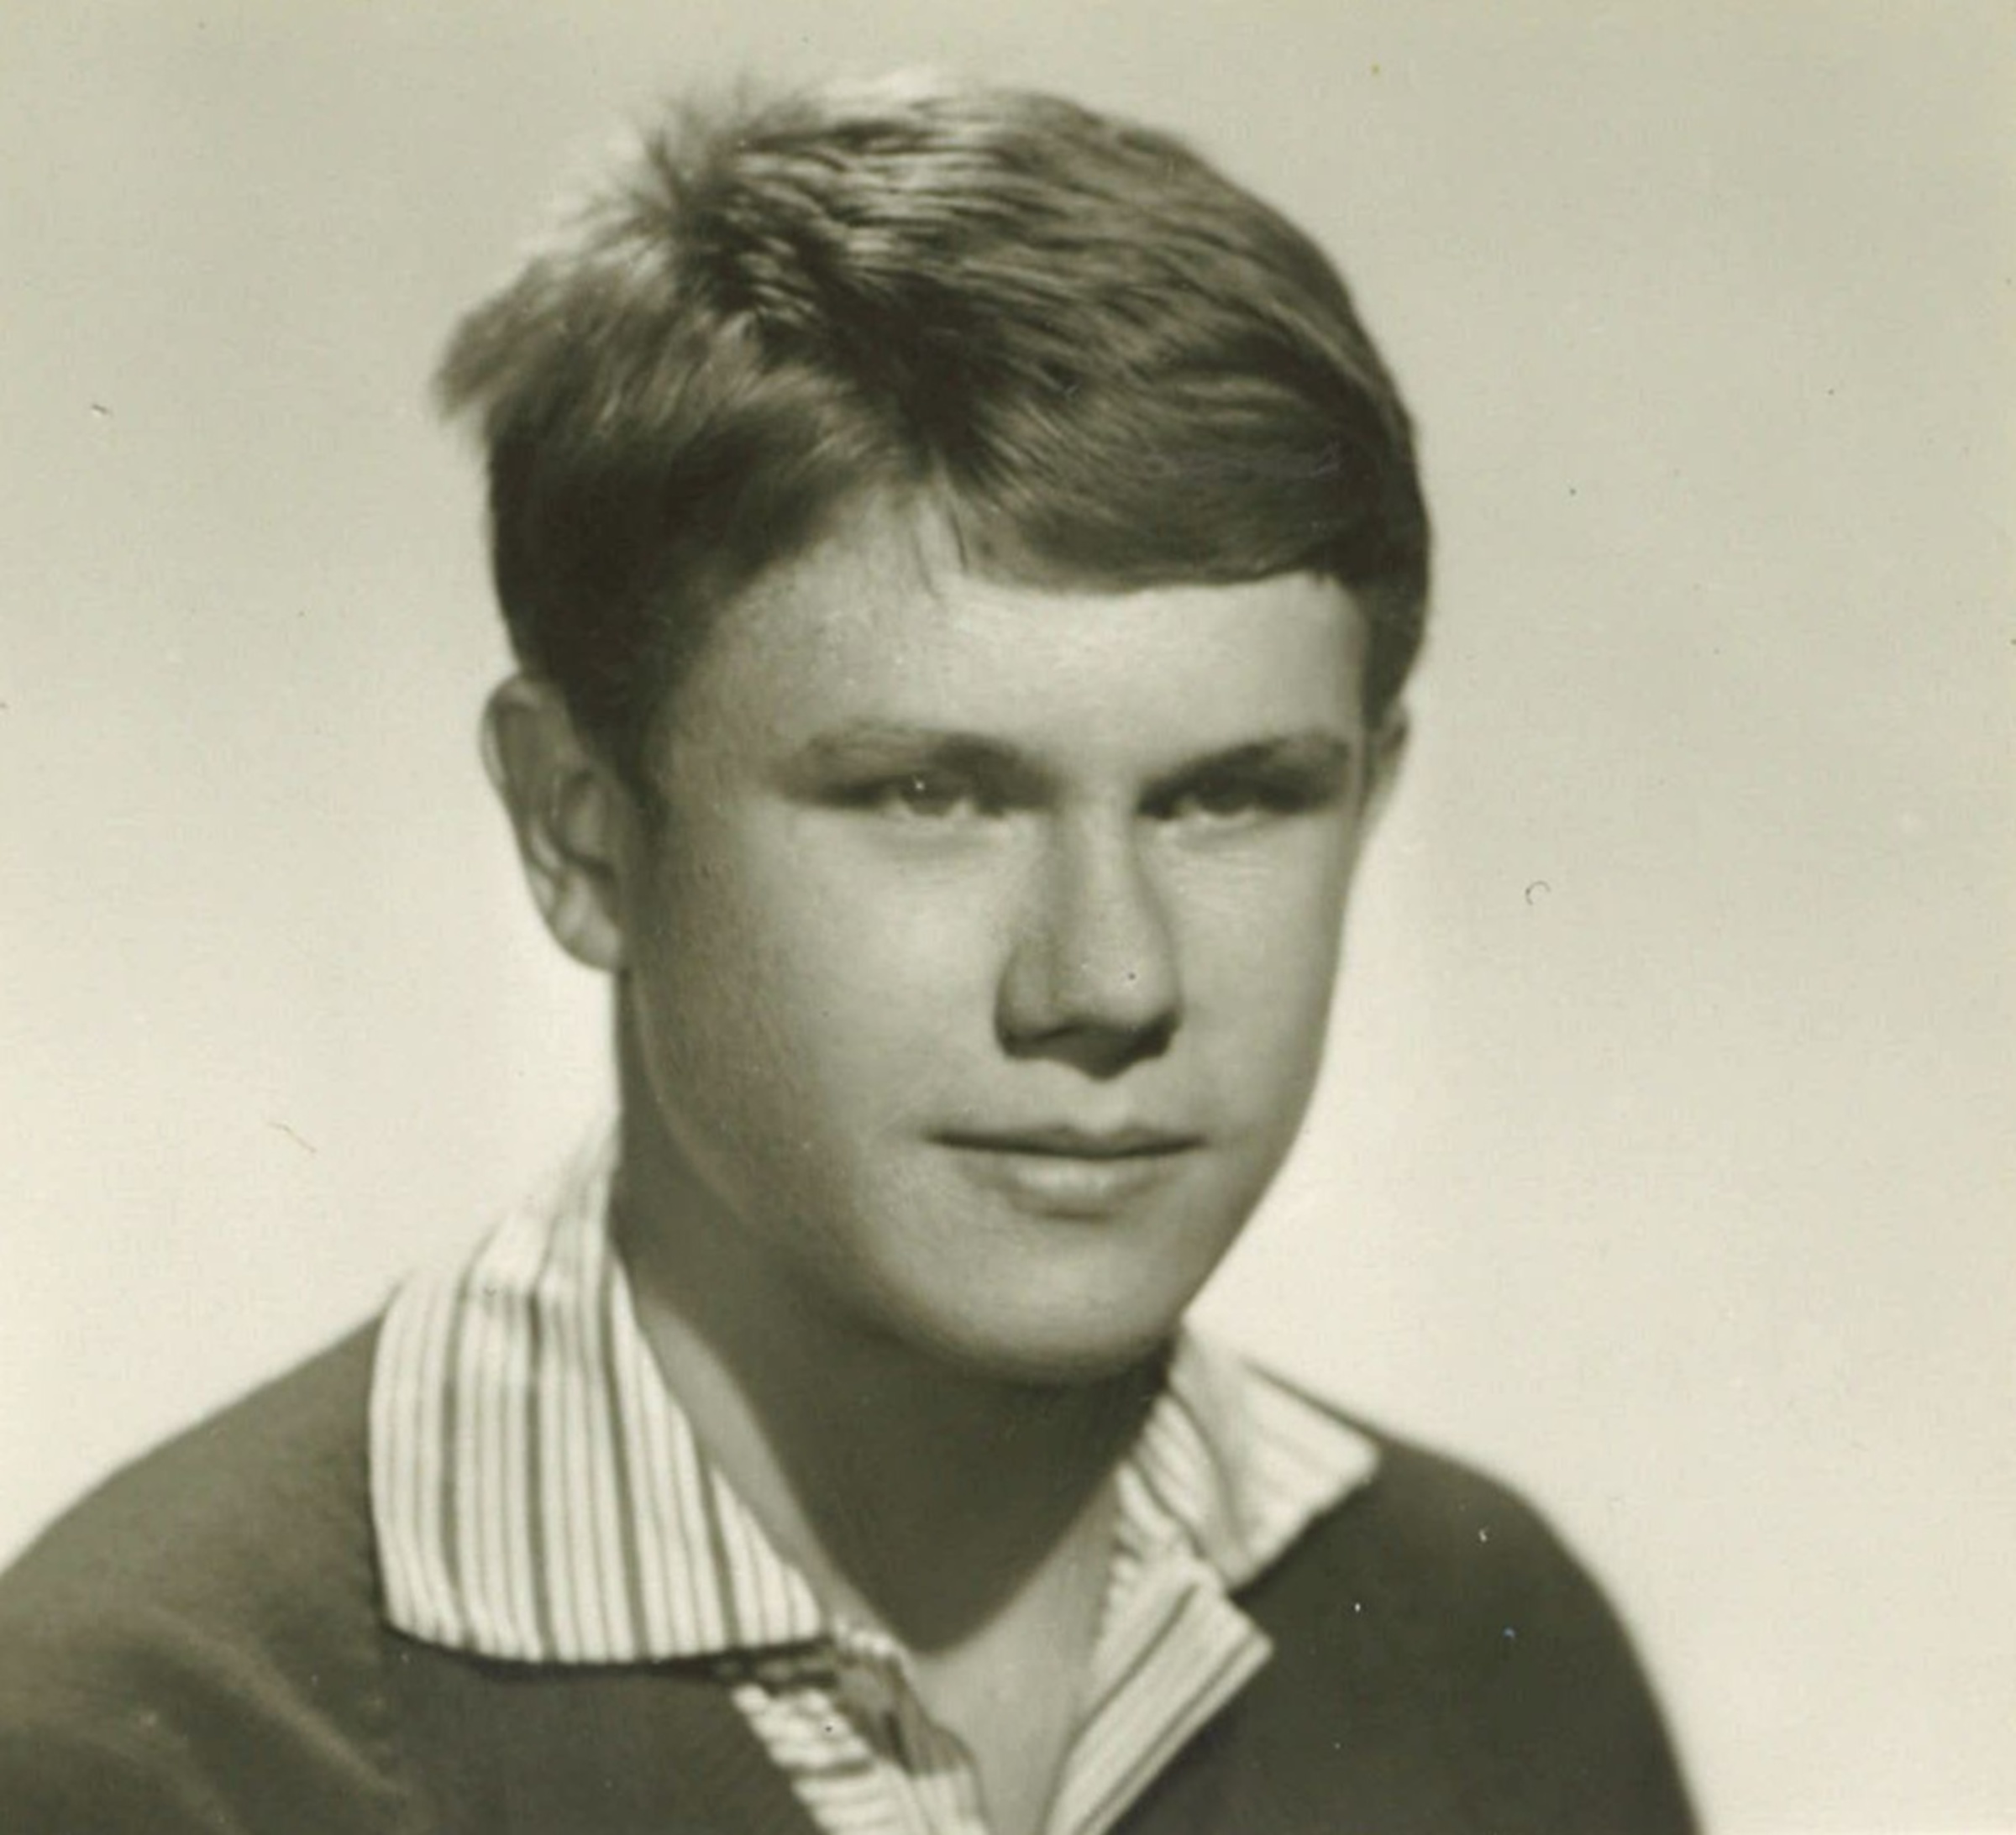 Photo from his student years